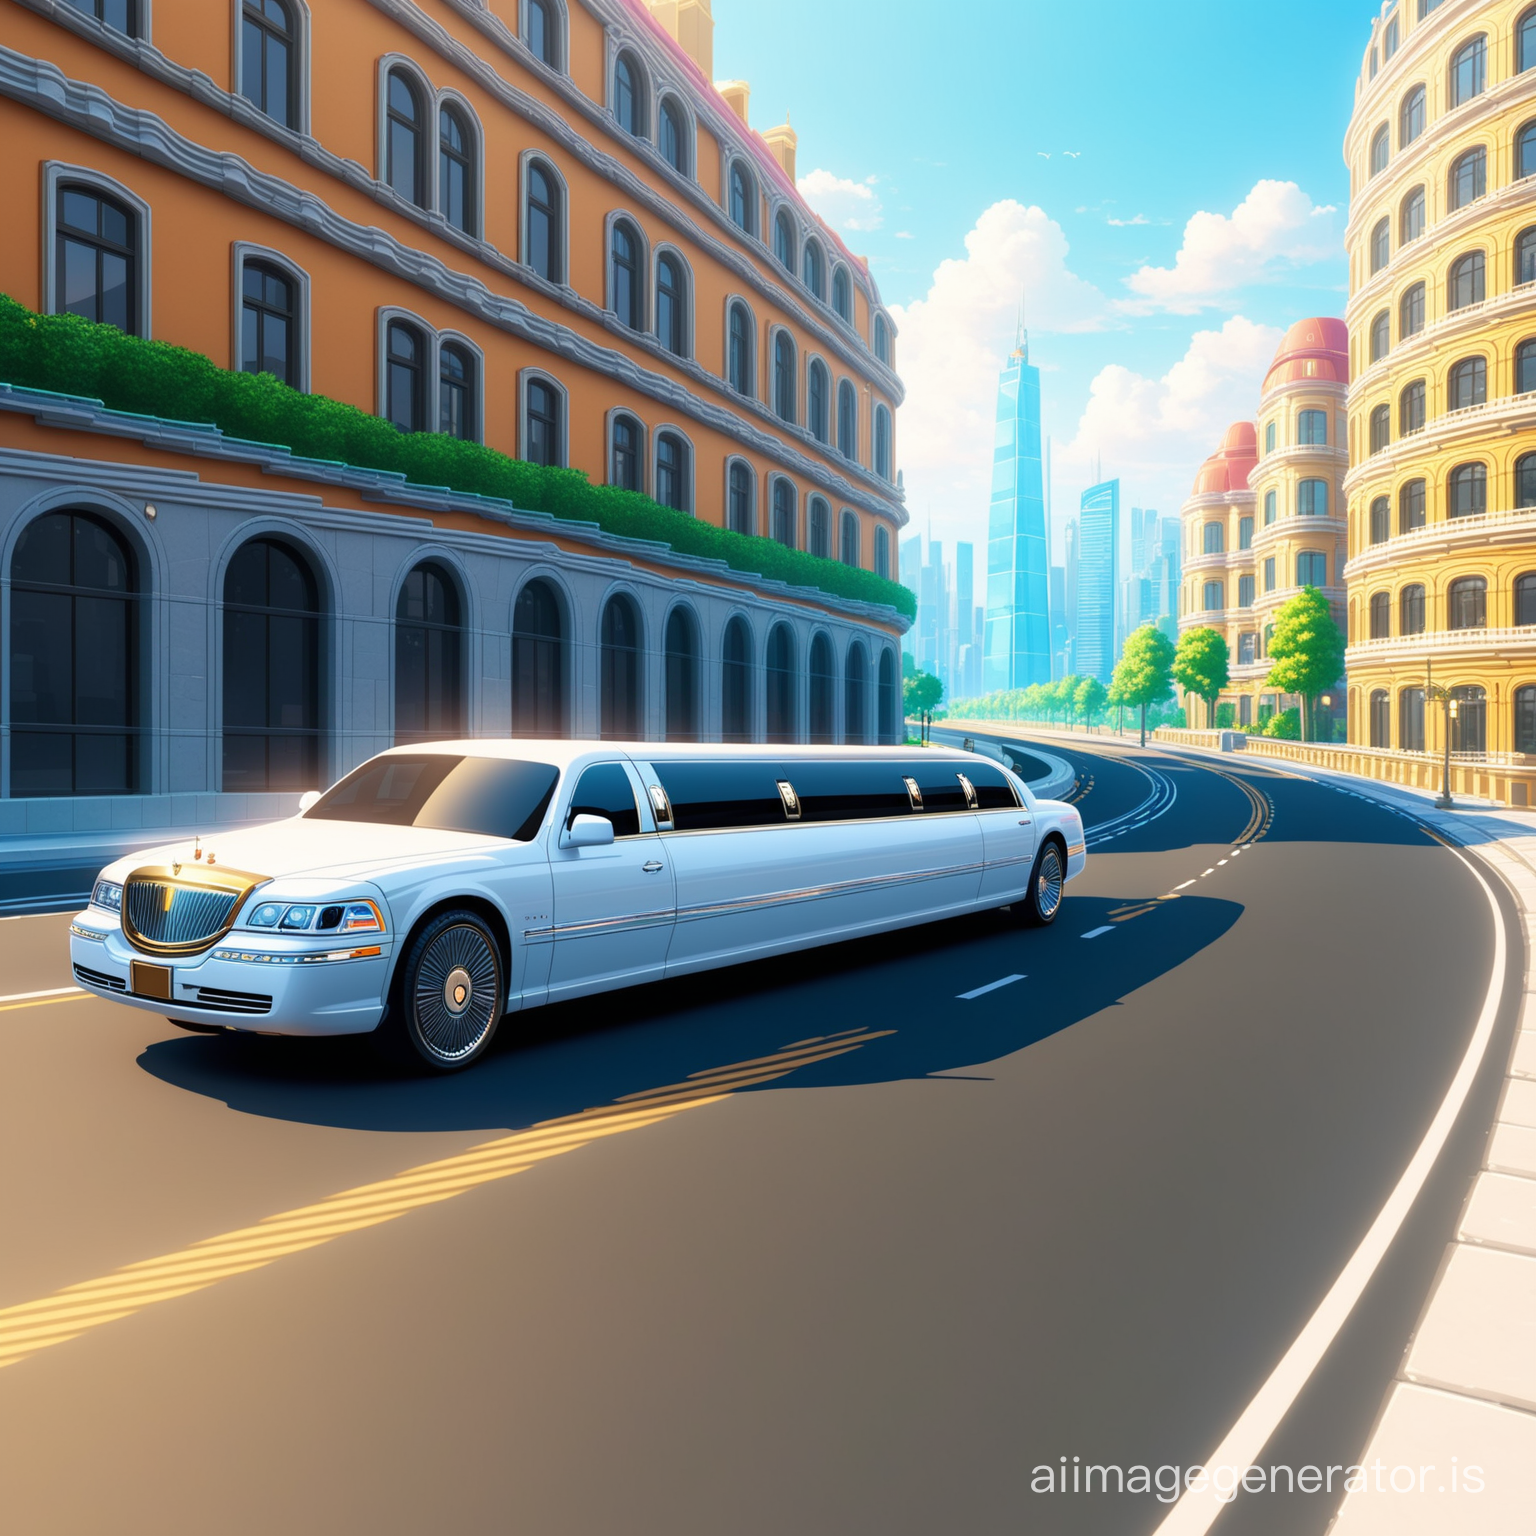 a luxury limousine drives along the road, a rich city is visible in the distance, casual style, interface, soft render, playrix style, bright colors, tasty render